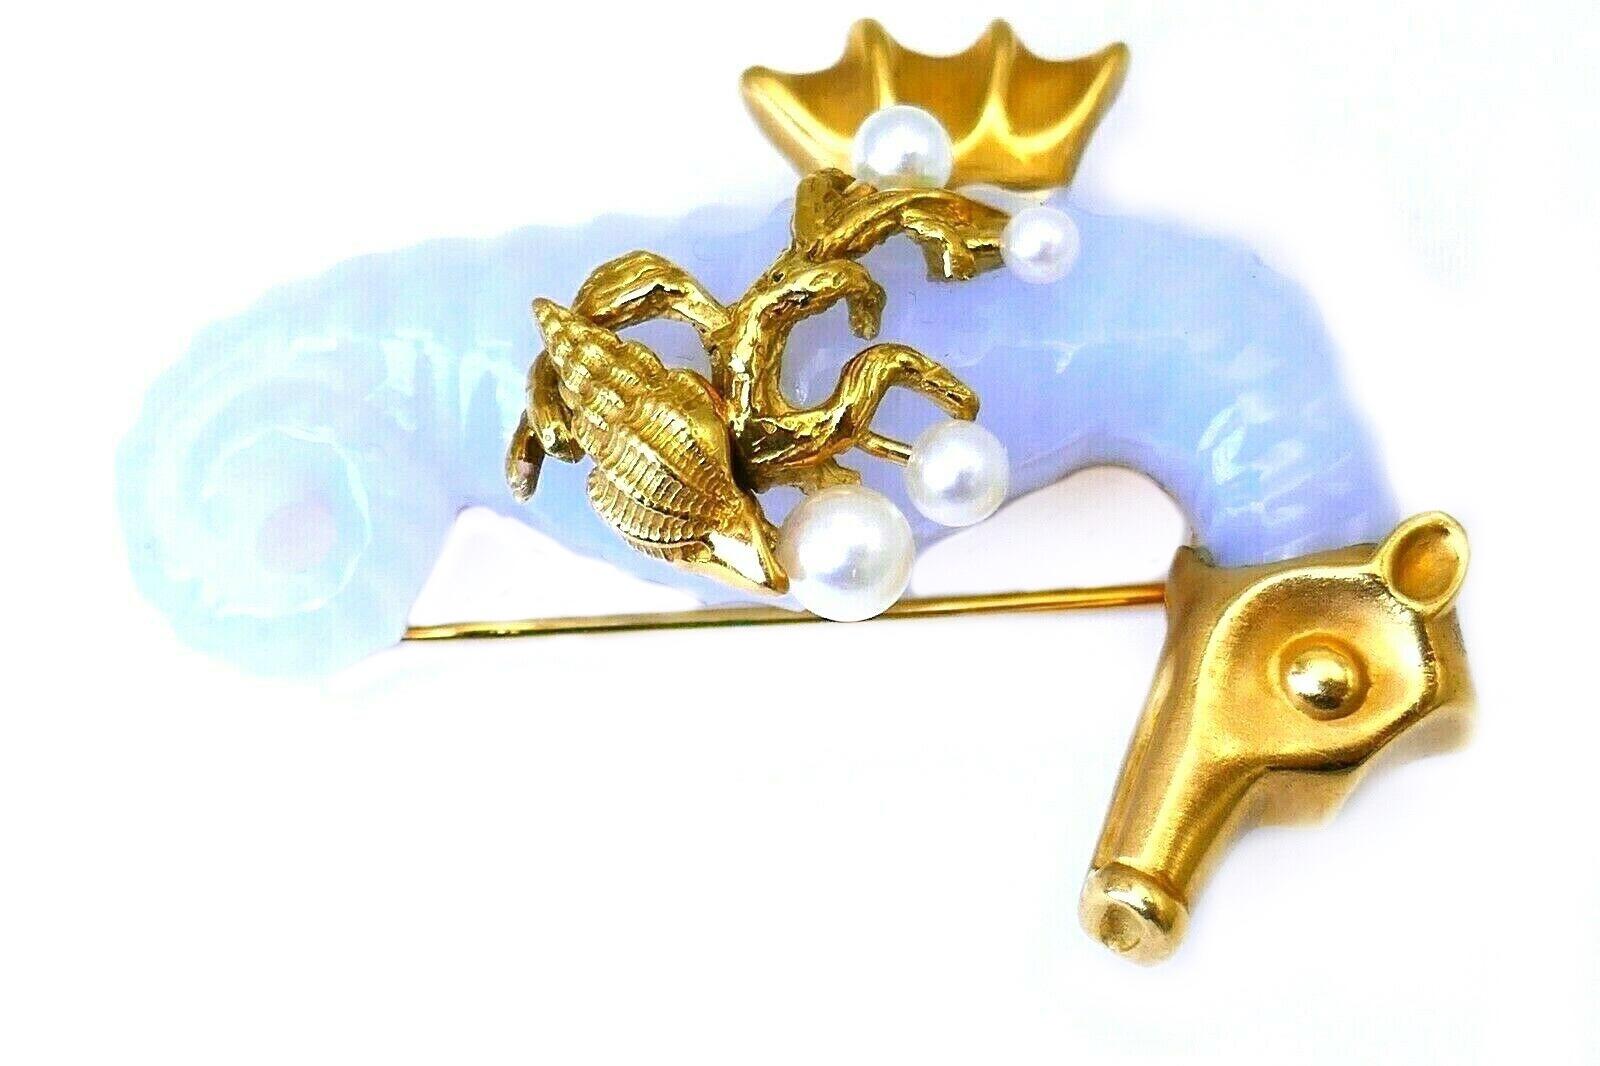 A beautiful Seahorse brooch by Seaman Schepps. 
Made of carved chalcedony and 18k yellow gold, featuring pearl. Stamped with Seaman Schepps maker's mark, a hallmark for 18k gold and a serial number.
Measurements: 2